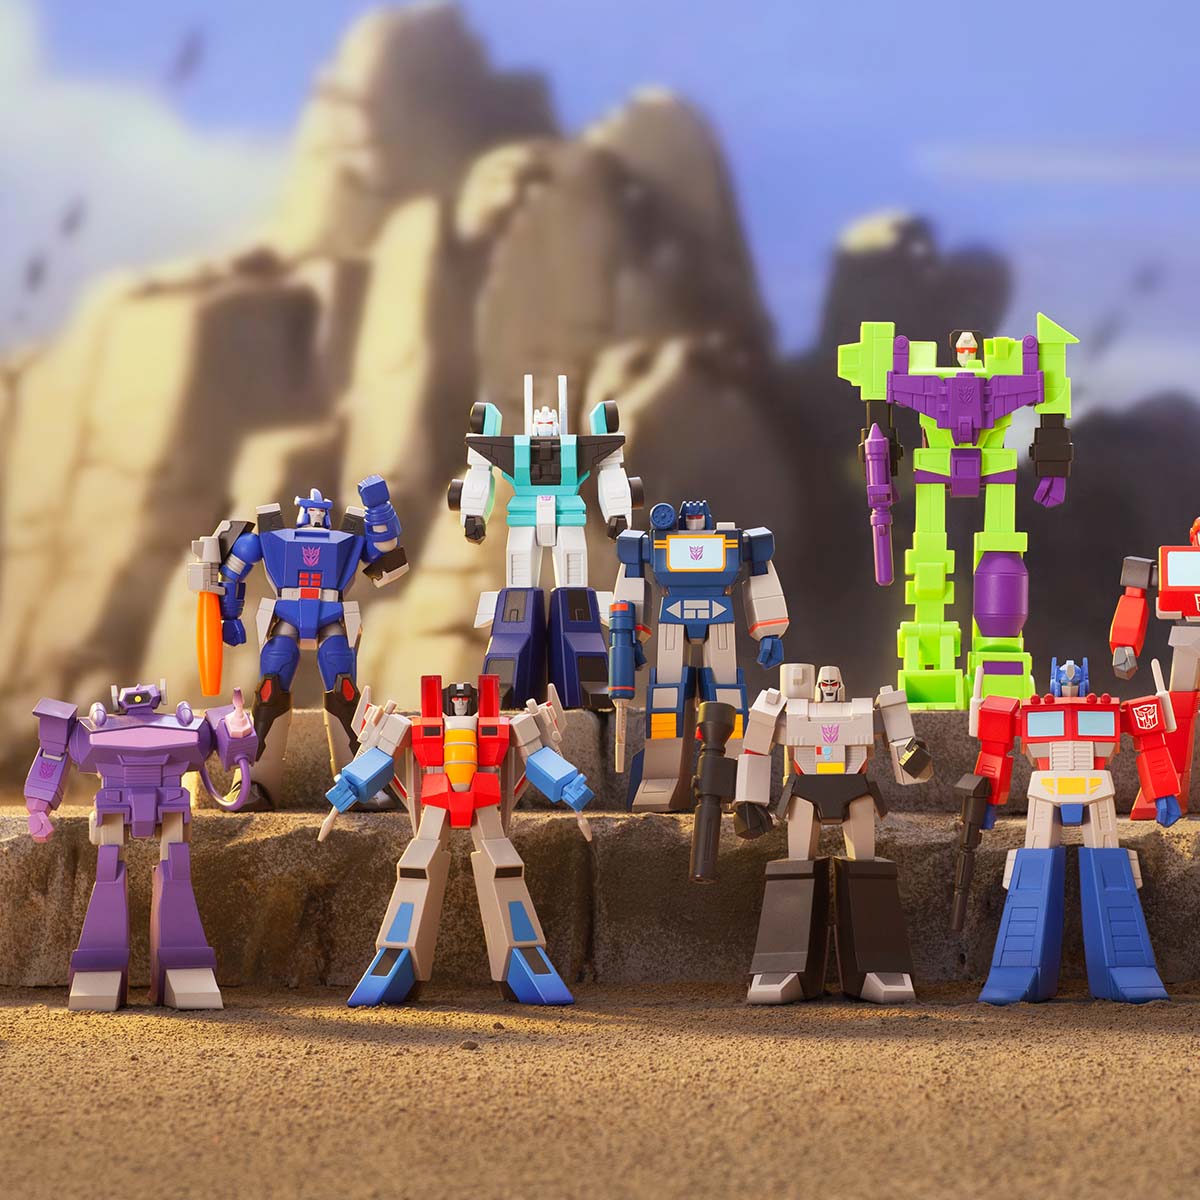 TRANSFORMERS Generations Blind Box Series: Toy robot figures and action figures on display.